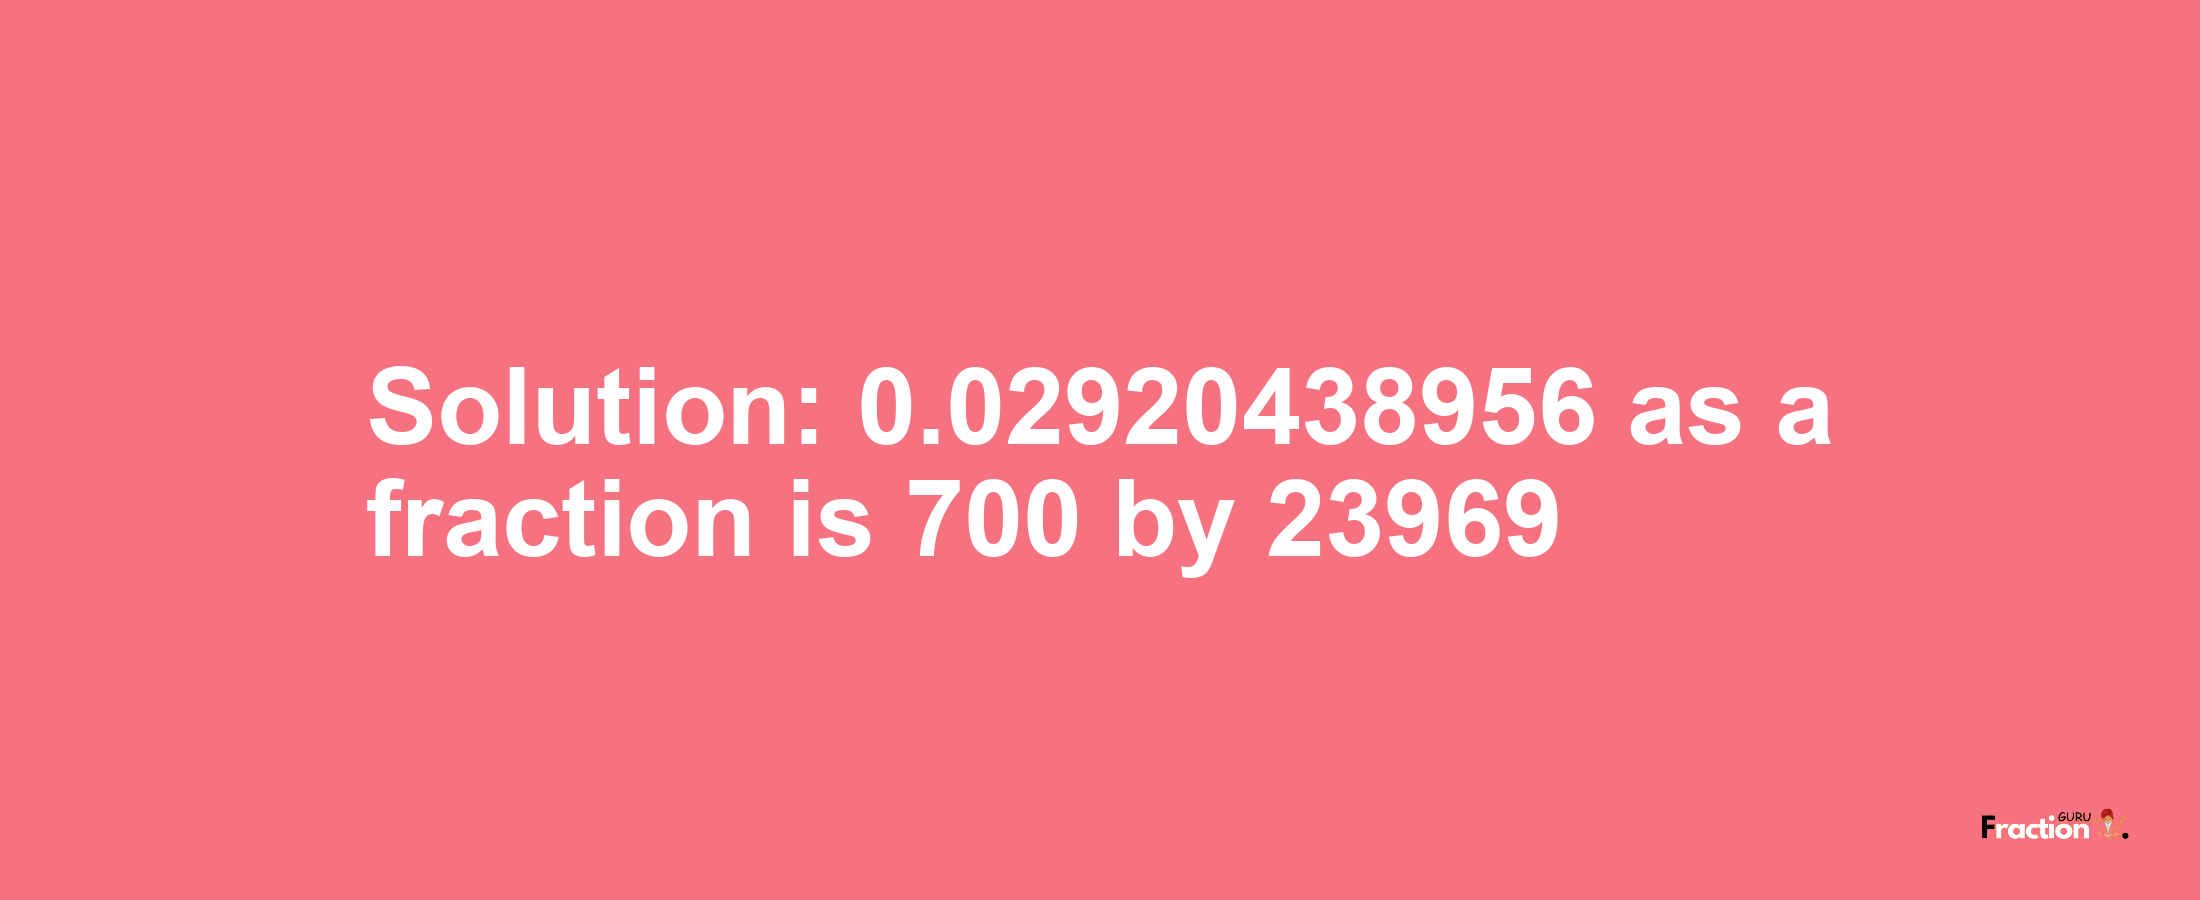 Solution:0.02920438956 as a fraction is 700/23969